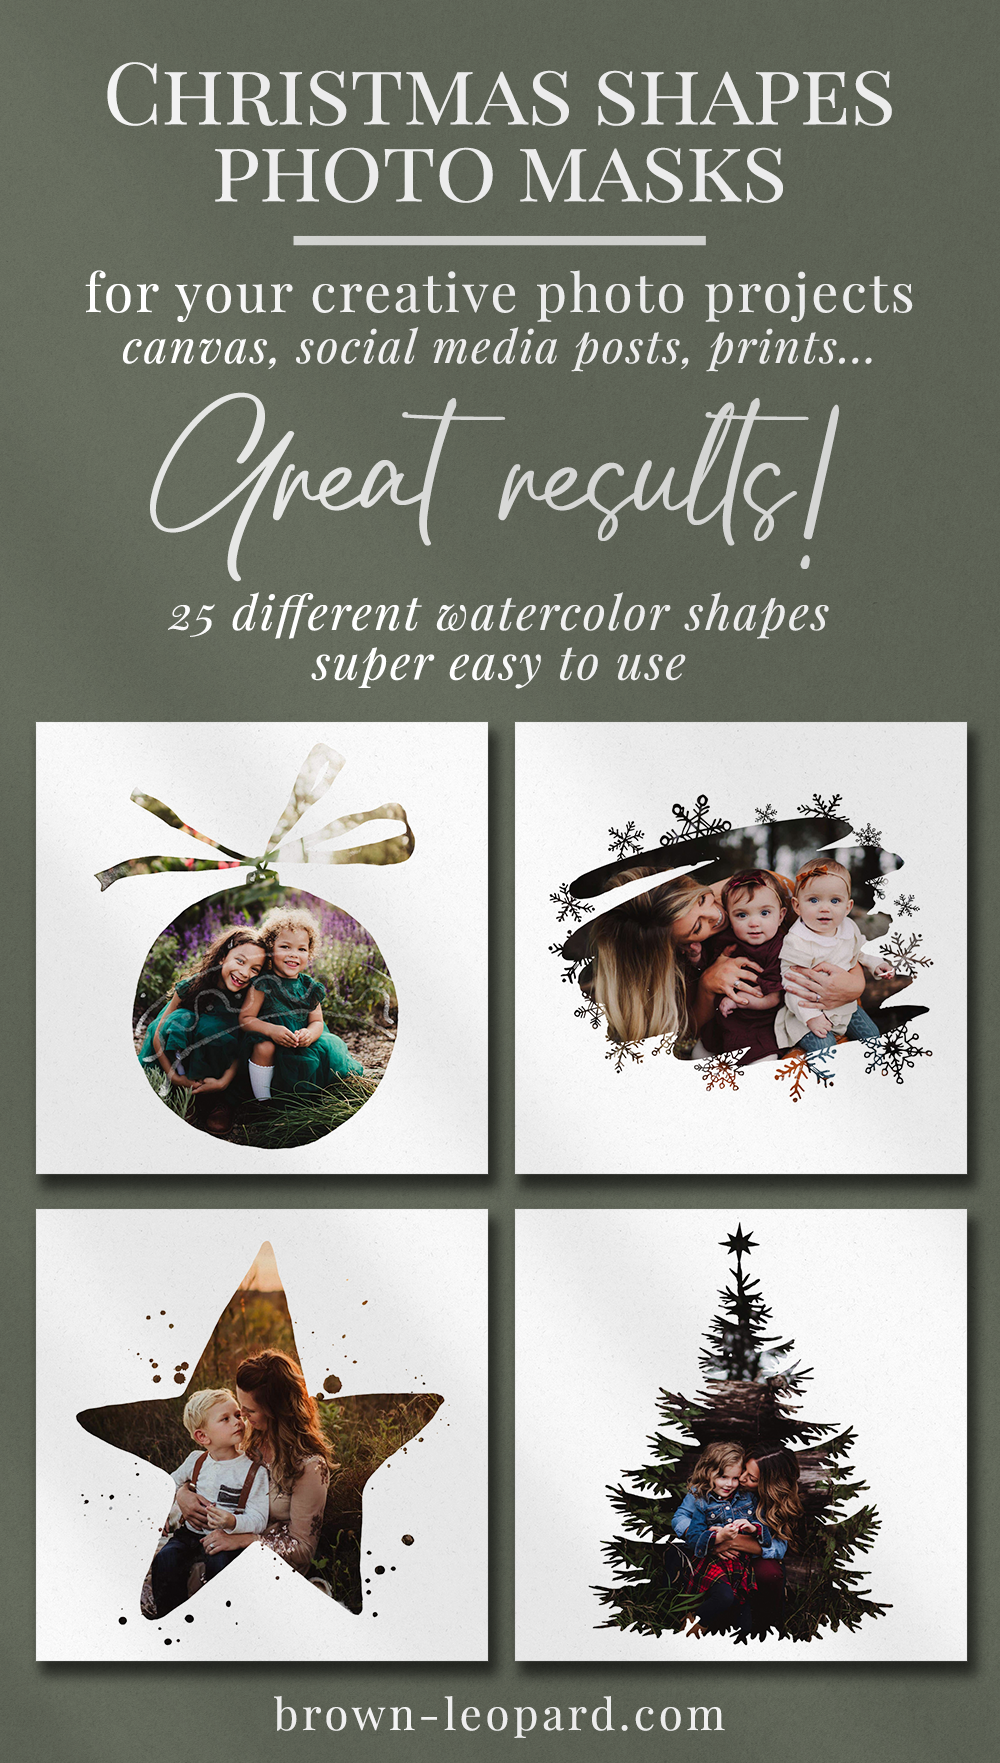 Create appealing designs in a few clicks with our Christmas Trees Photomasks, super easy to use, great results and it is fun! Attract more potential clients with original Instagram posts, beautiful cards, prints and canvas. Free video tutorial included. Modern graphic design templates for Photoshop from Brown Leopard.